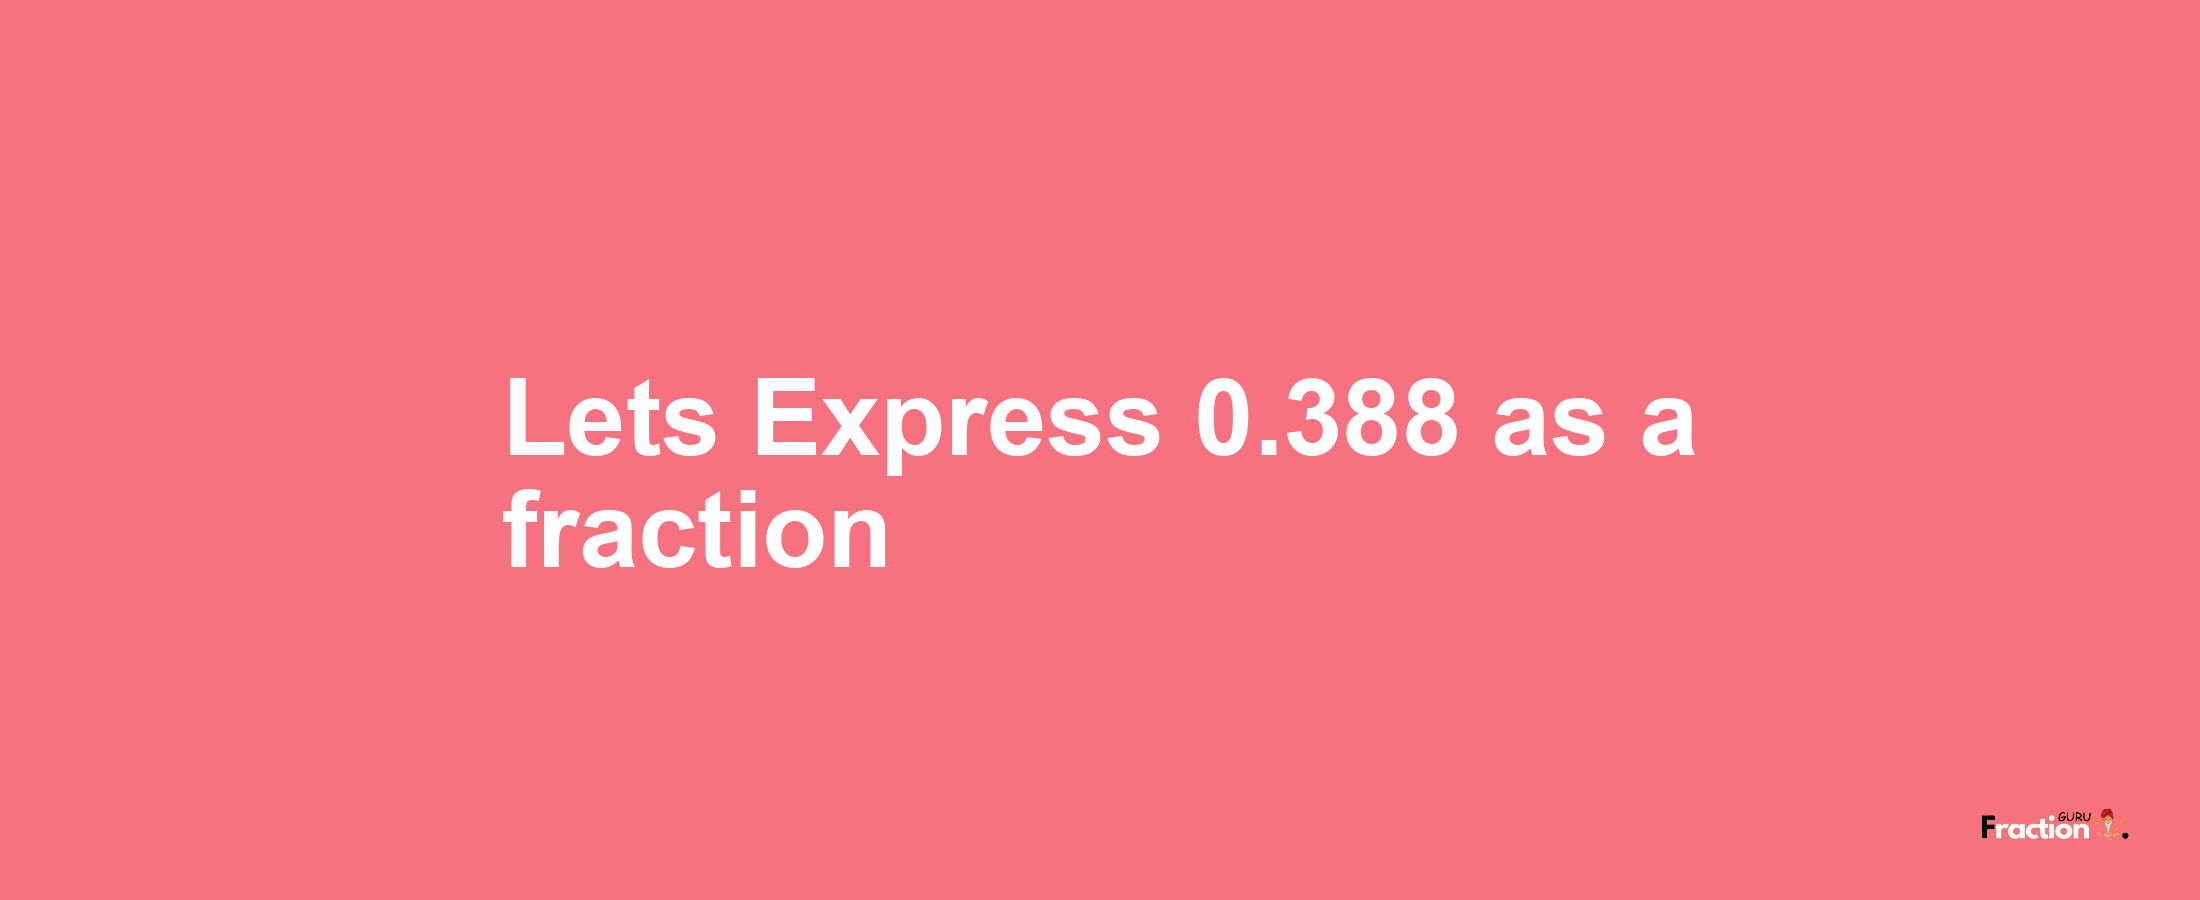 Lets Express 0.388 as afraction